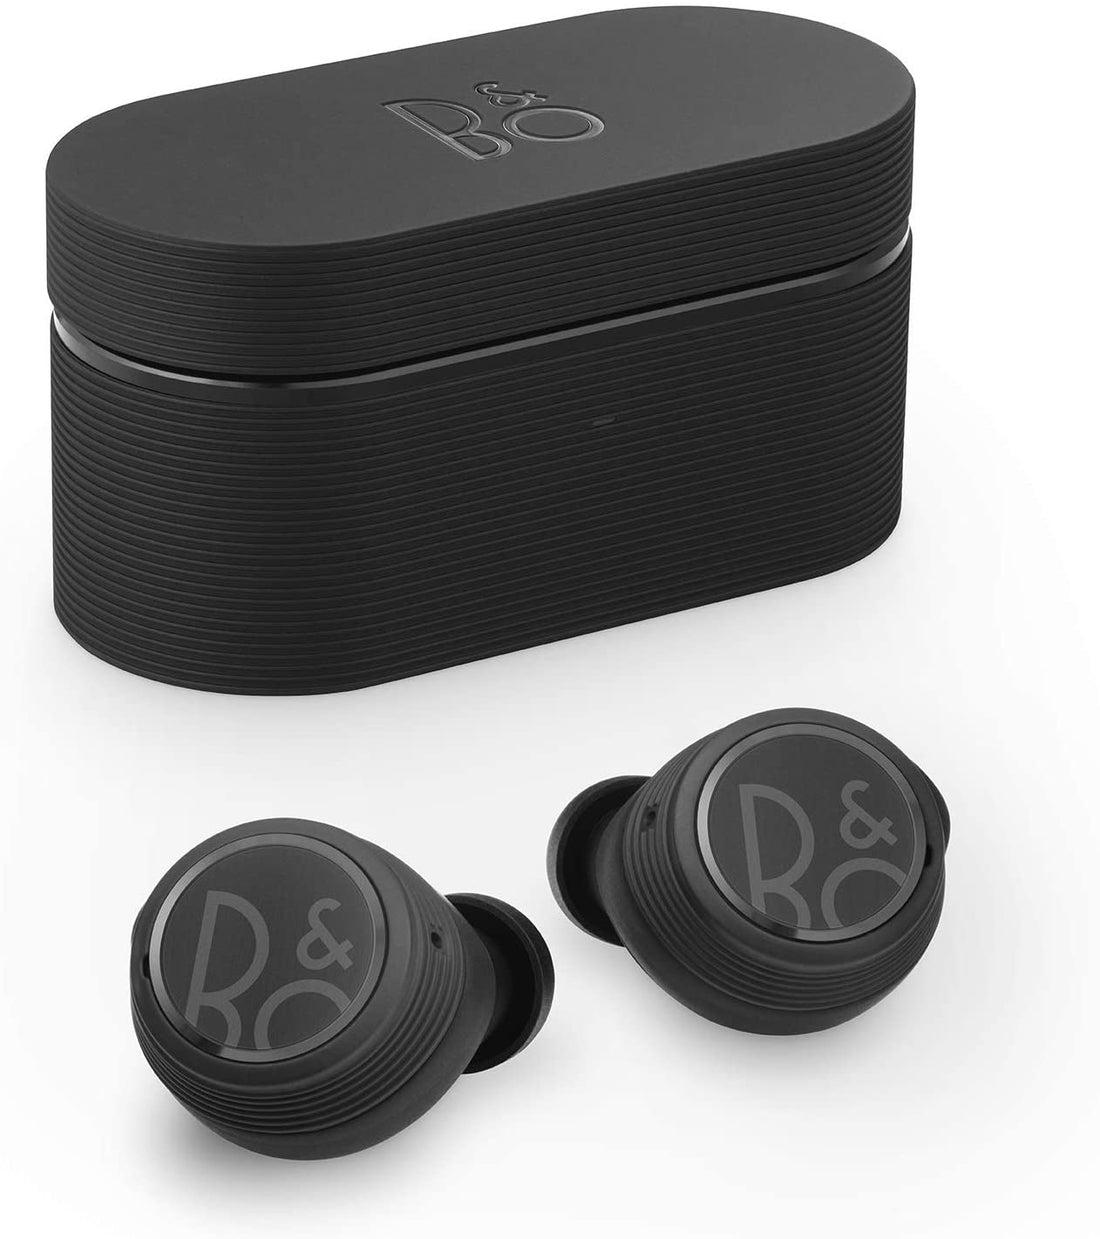 Bang &amp; Olufsen Beoplay E8 Sports Wireless Earbuds With Charging Case - Black (Certified Refurbished)